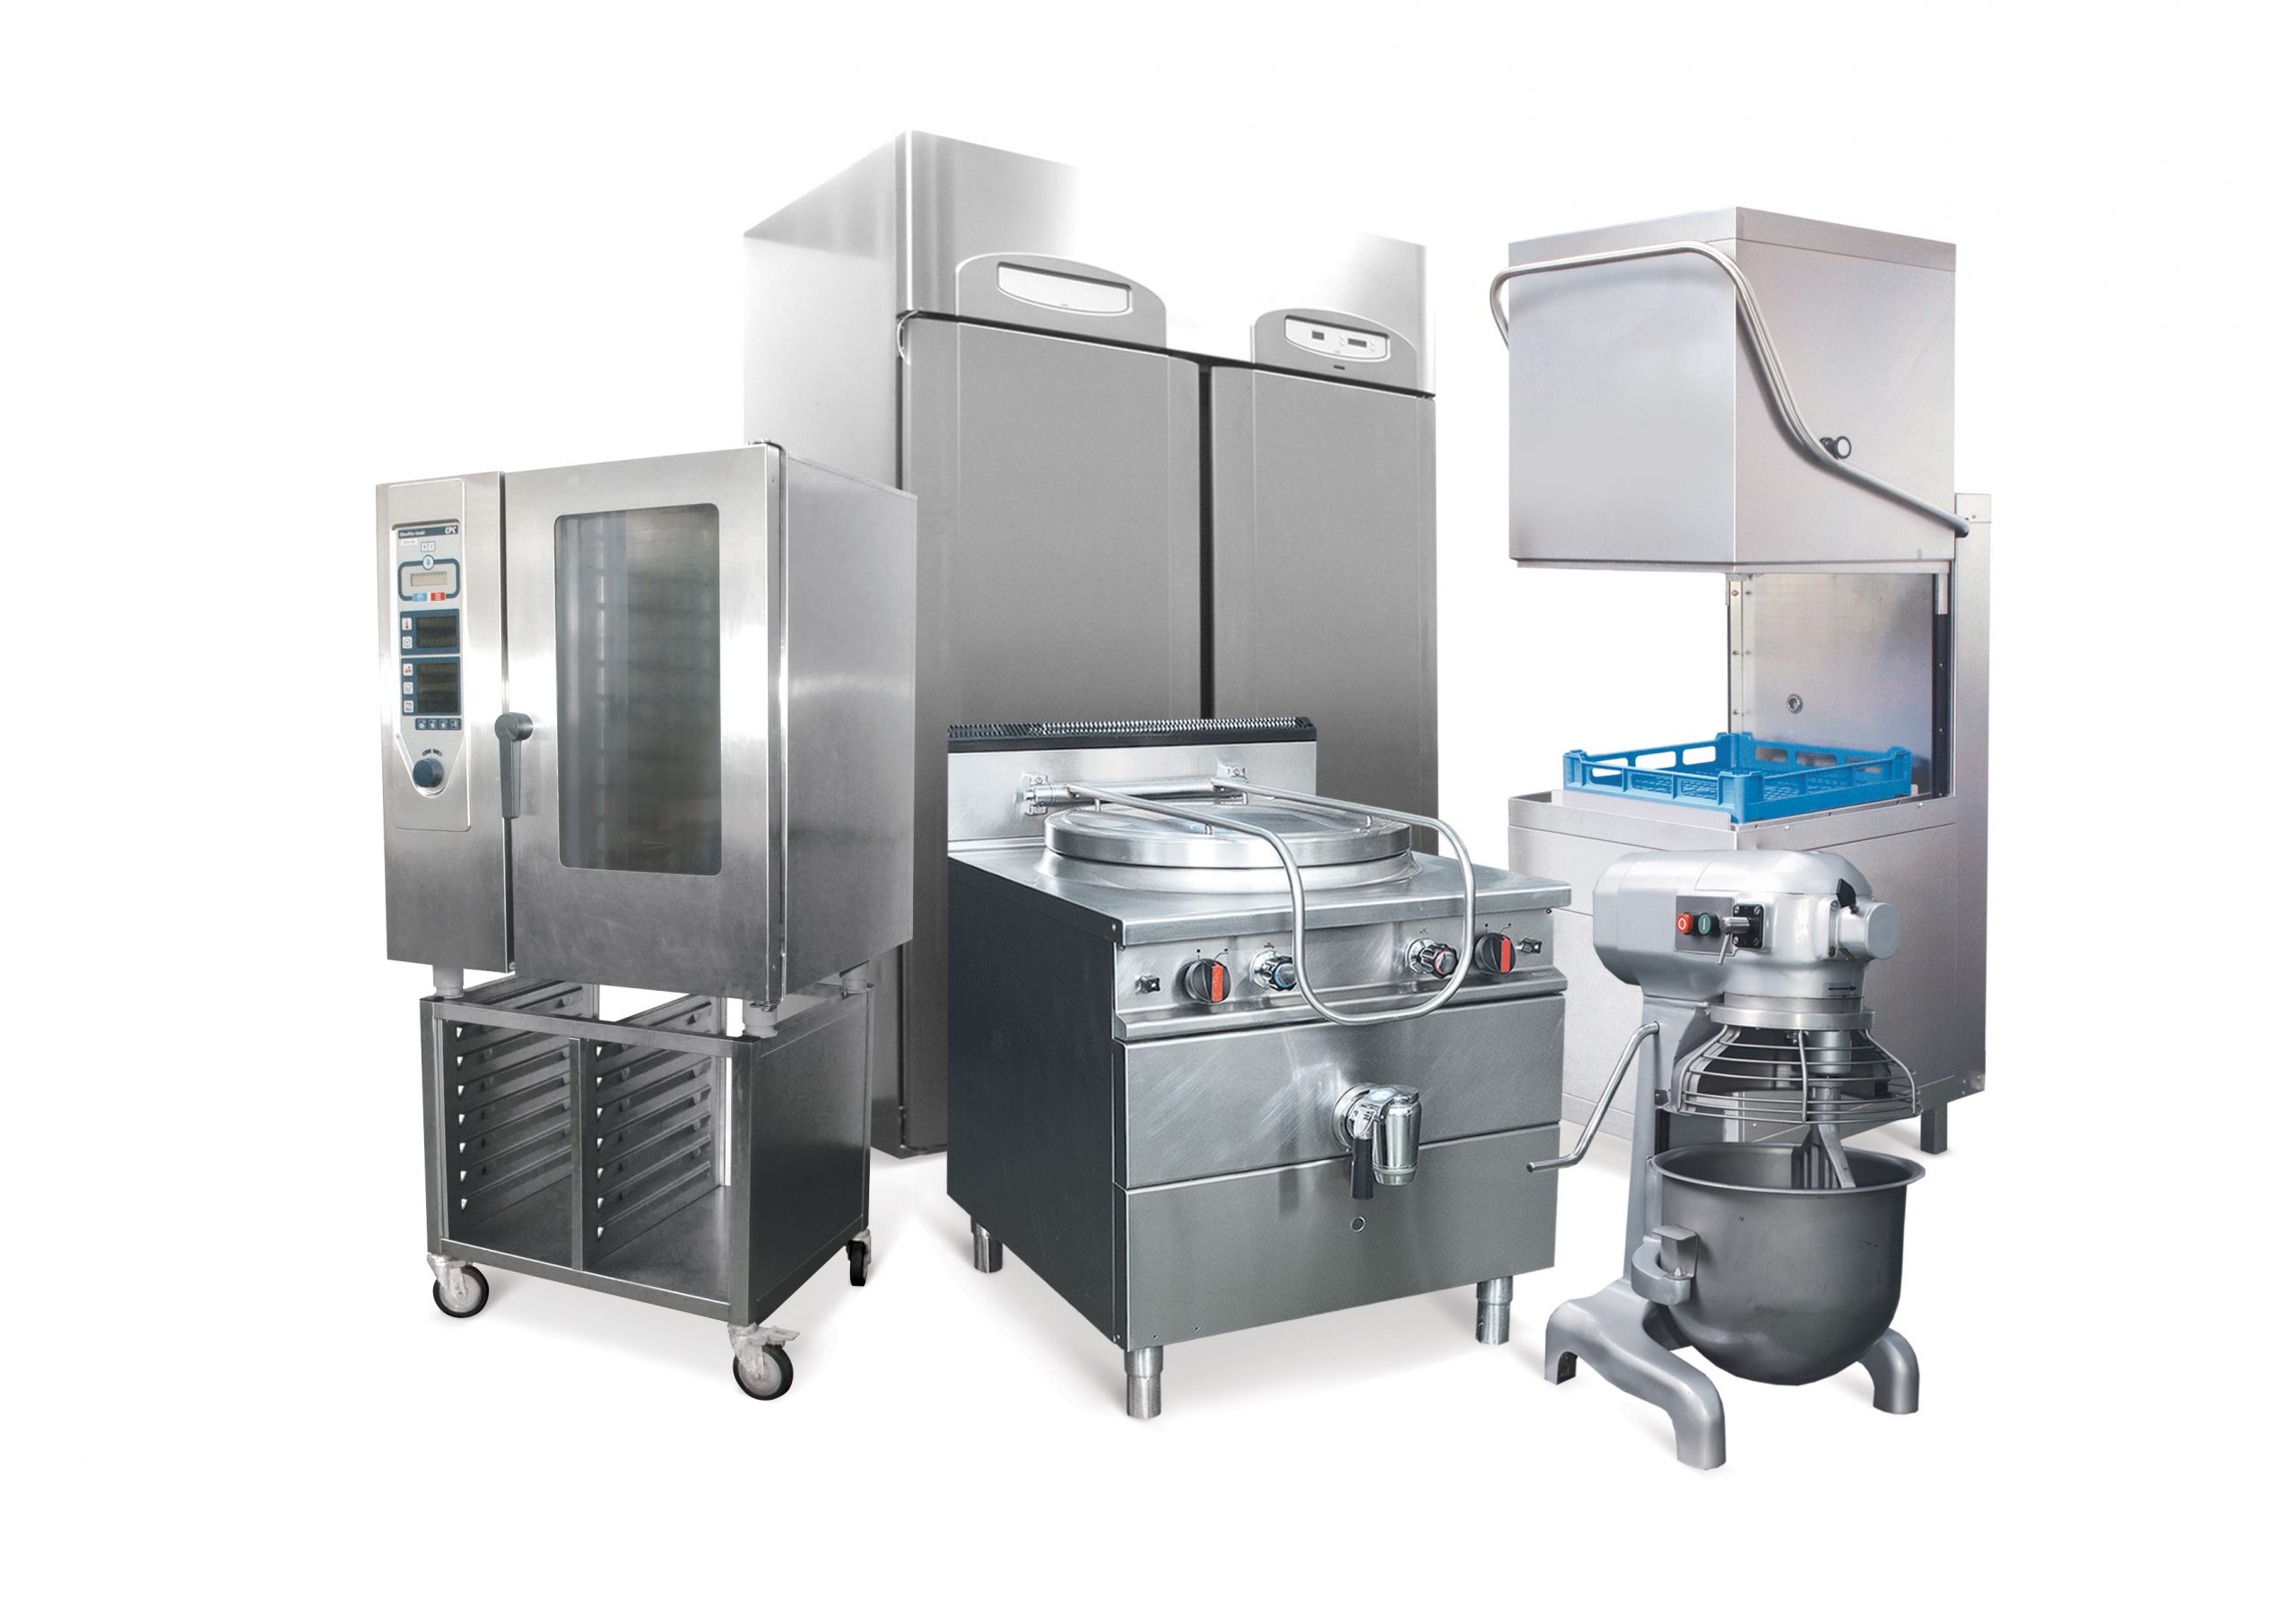 Proactive recycling: energising the second-hand foodservice equipment market